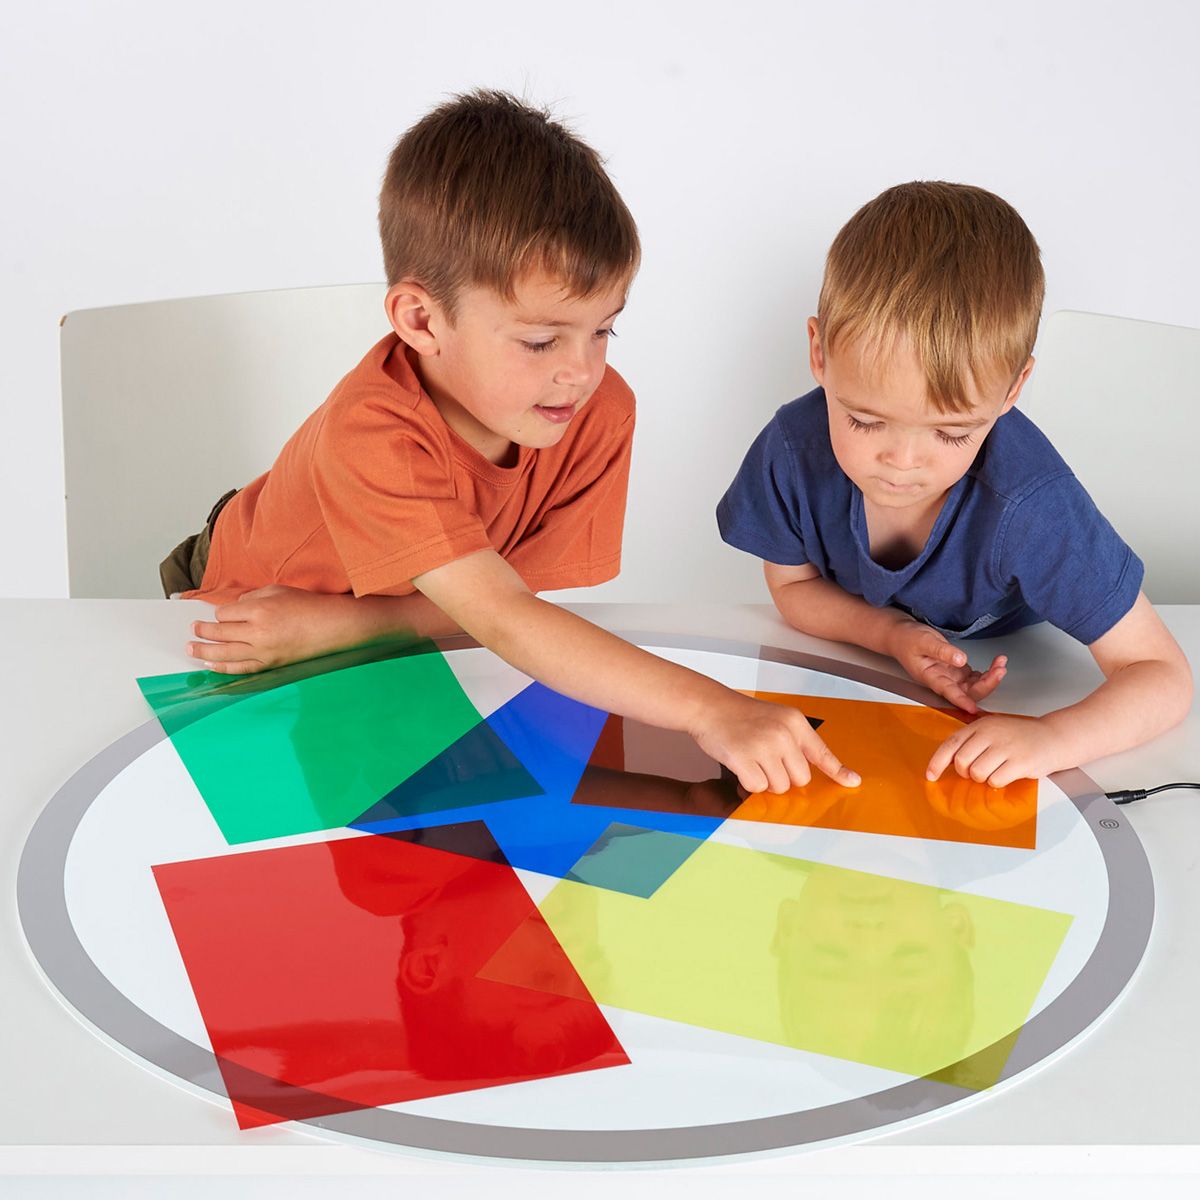 Acetate Sheets, Introducing our vibrant and versatile set of 5 colourful A4 acetate sheets! Designed to ignite creativity and enhance learning experiences, these acetate sheets are perfect for exploring the captivating world of colour-mixing and can be used in conjunction with other colour and light resources on a light panel. Crafters and builders will rejoice at the flexibility and adaptability of these sheets. Cut them into desired shapes or bend them to fit your project requirements effortlessly. Whethe